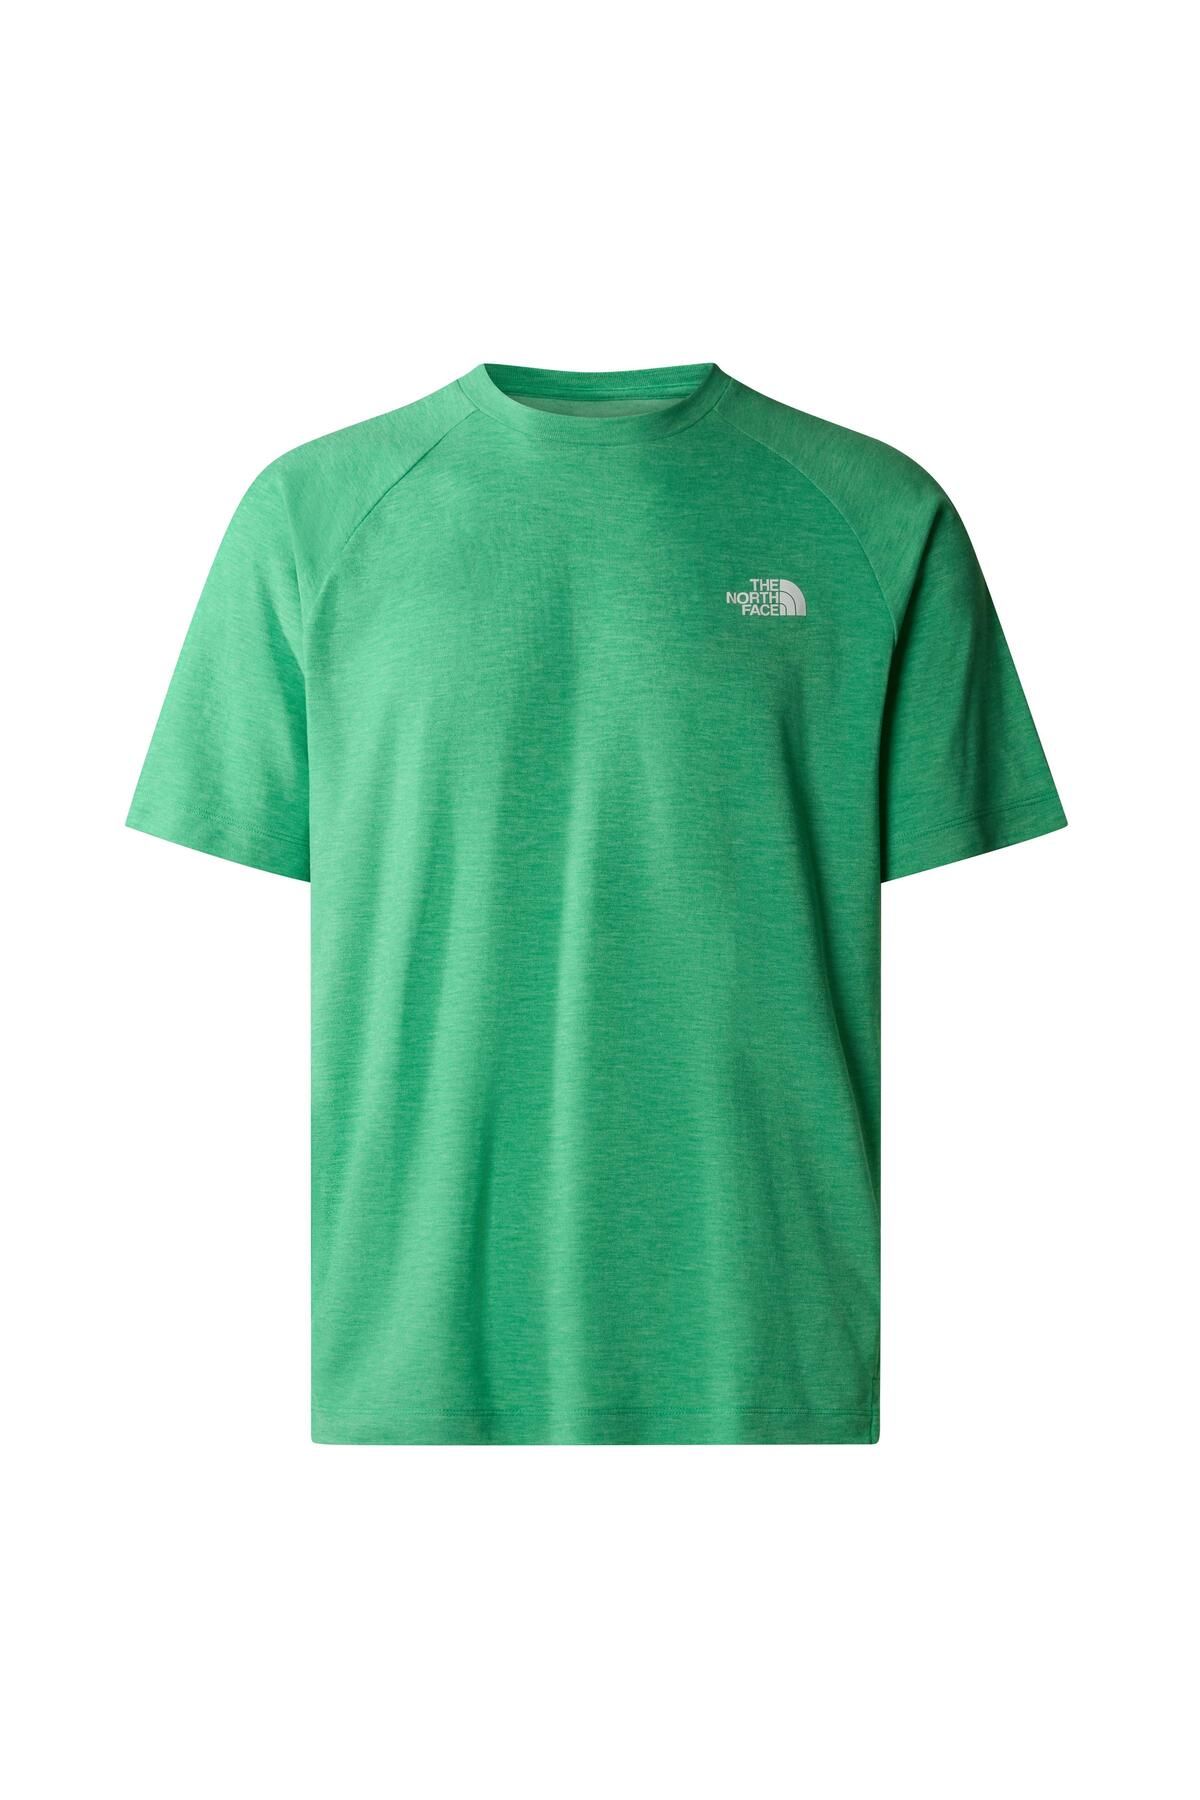 The North Face M FOUNDATION S/S TEE